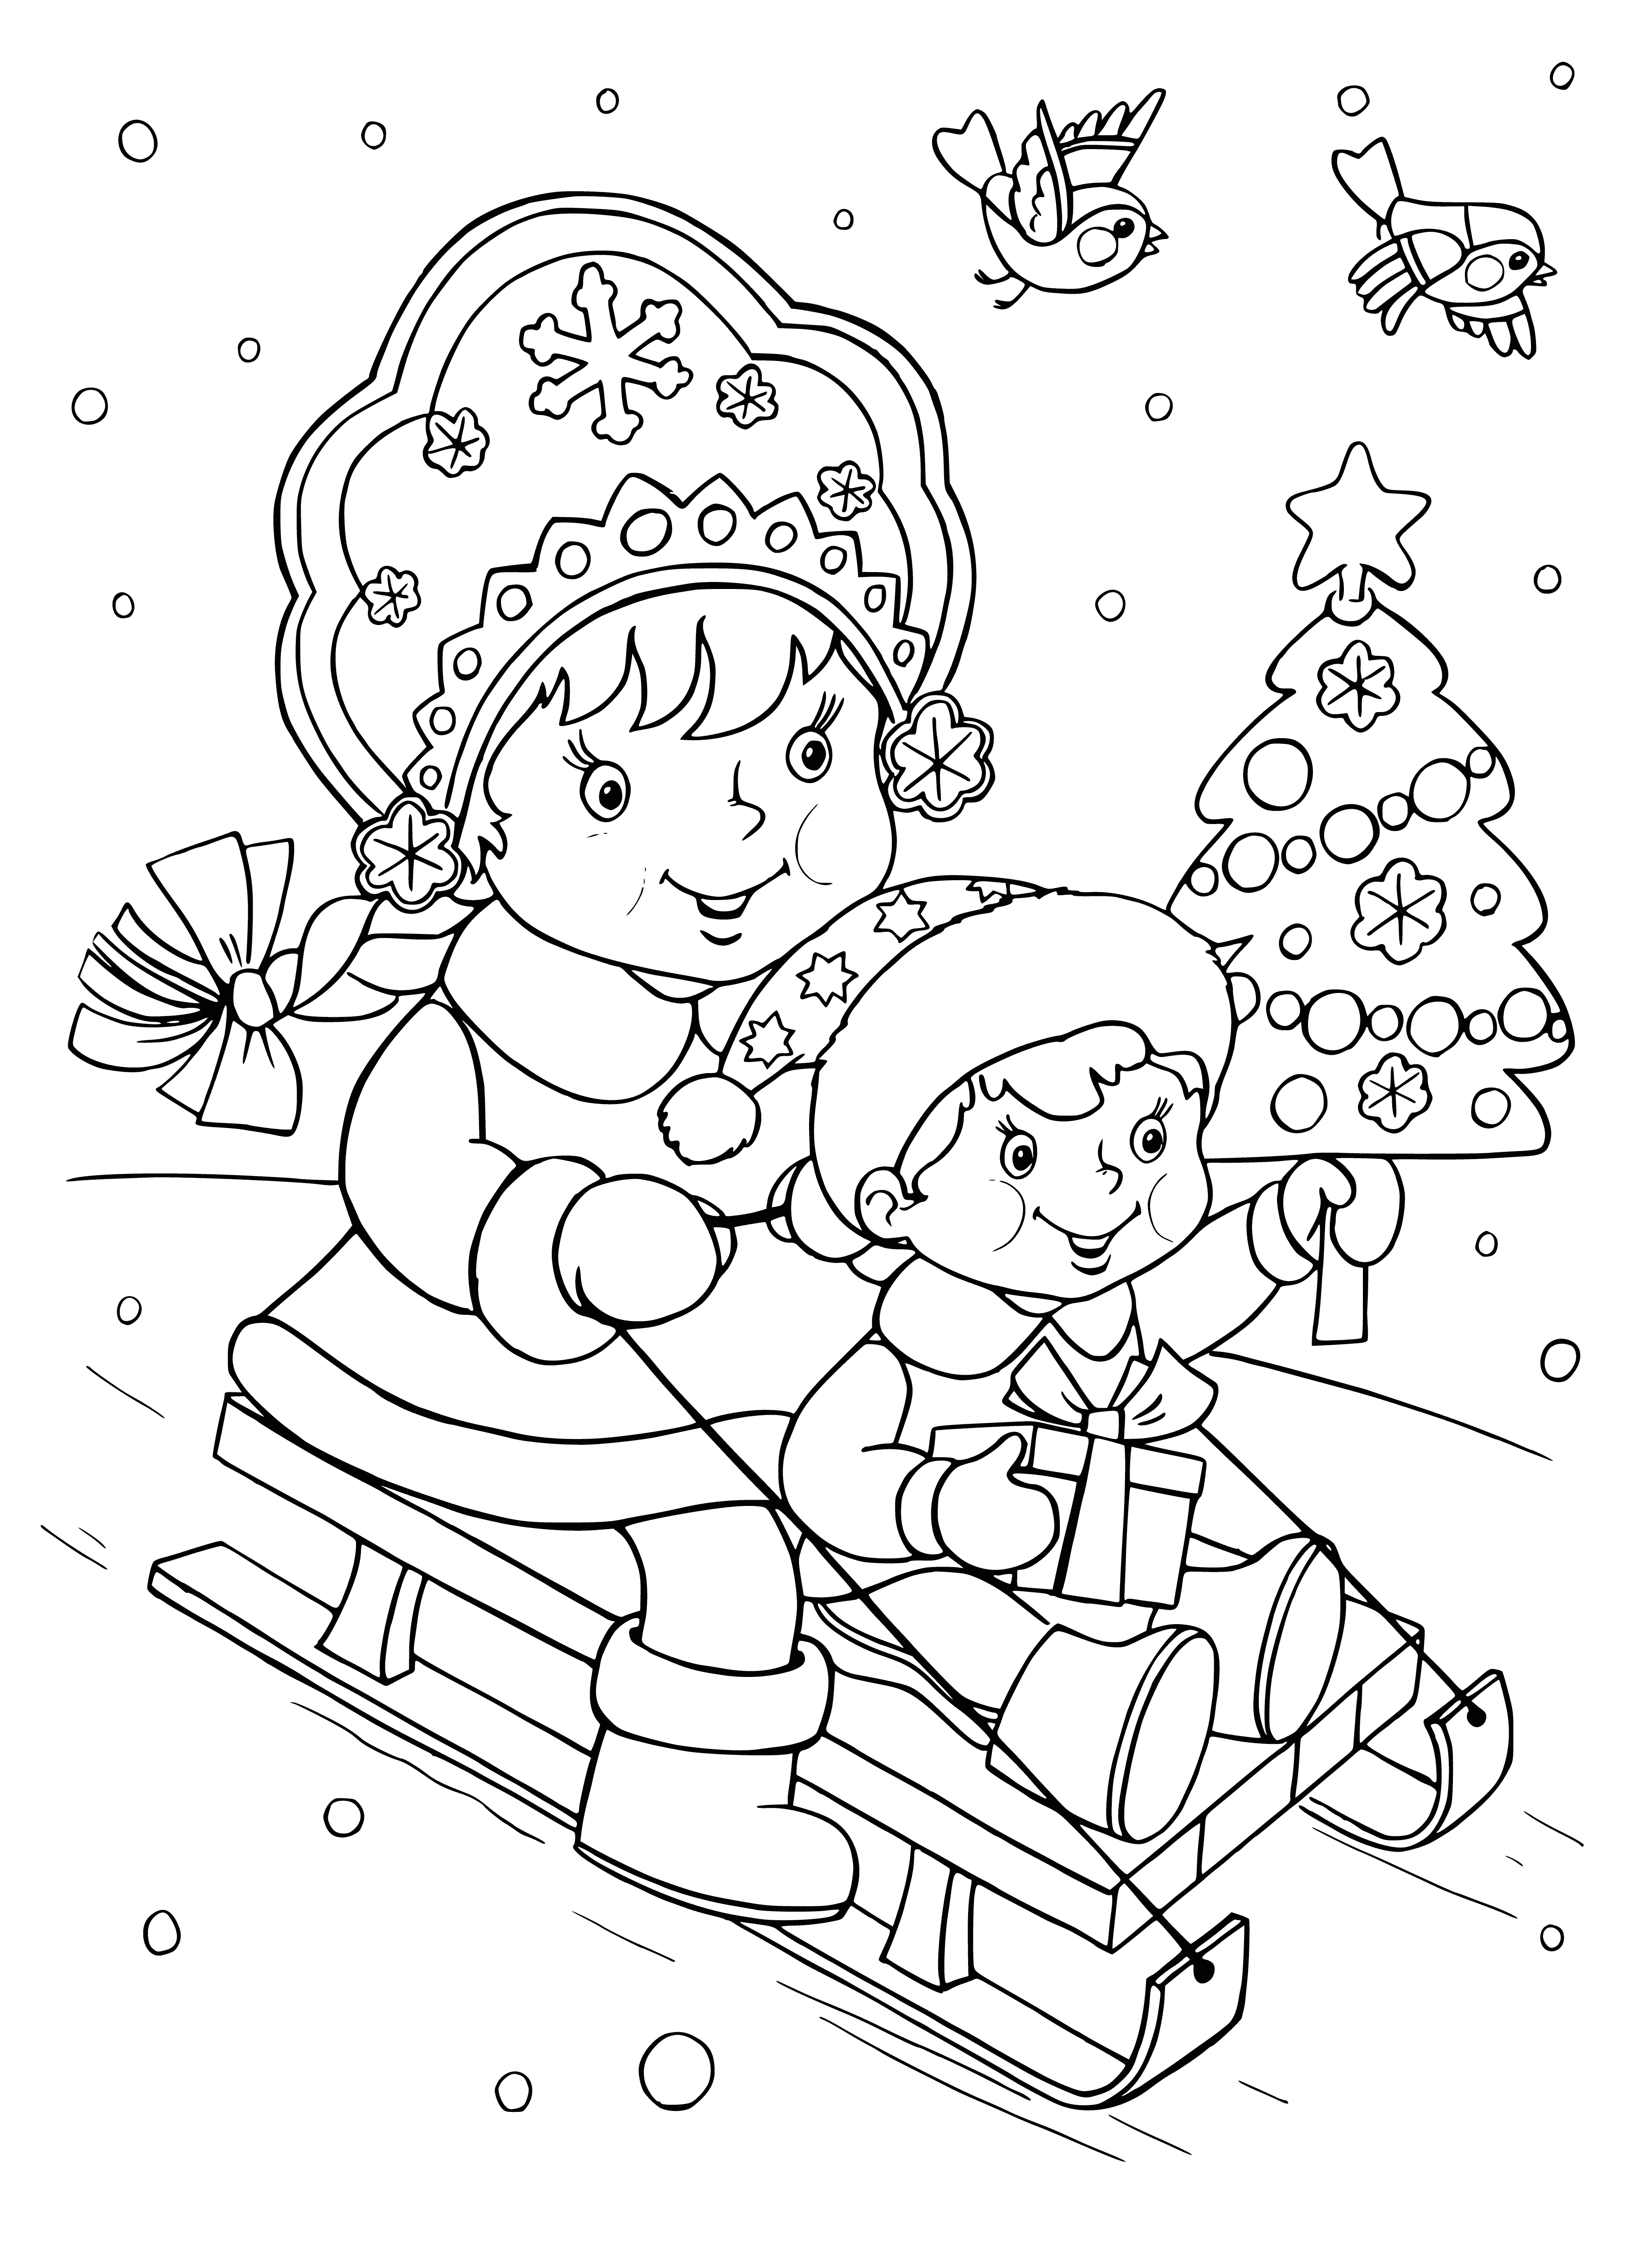 Girl sledding, wearing a scarf and hat, smiles with joy.